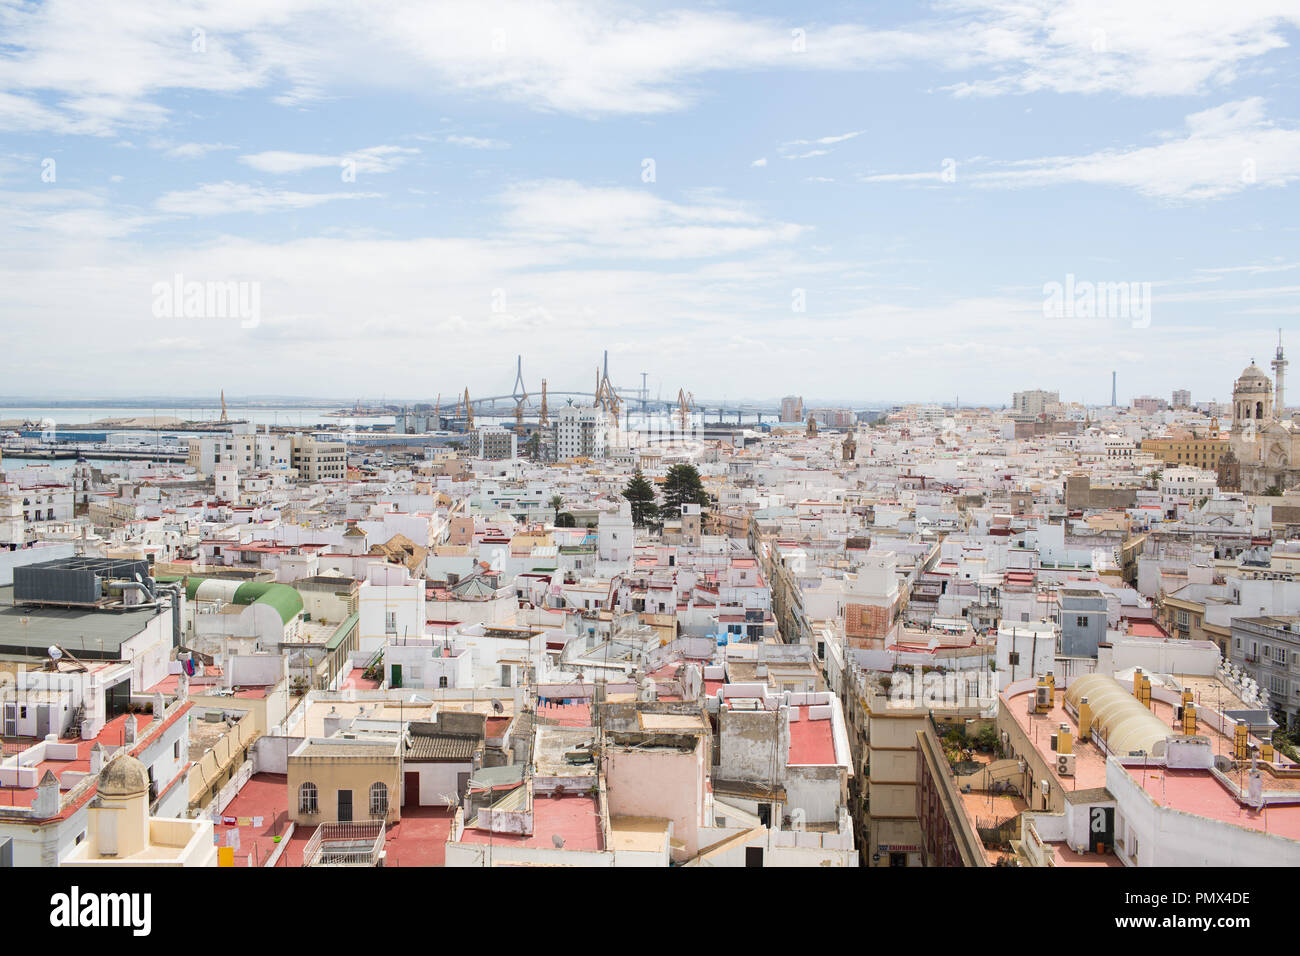 A view looking down on the rooftops of the city of Cadiz in Spain from the Tavira Tower (camera obscura) with the La Pepa Bridge in the distance Stock Photo